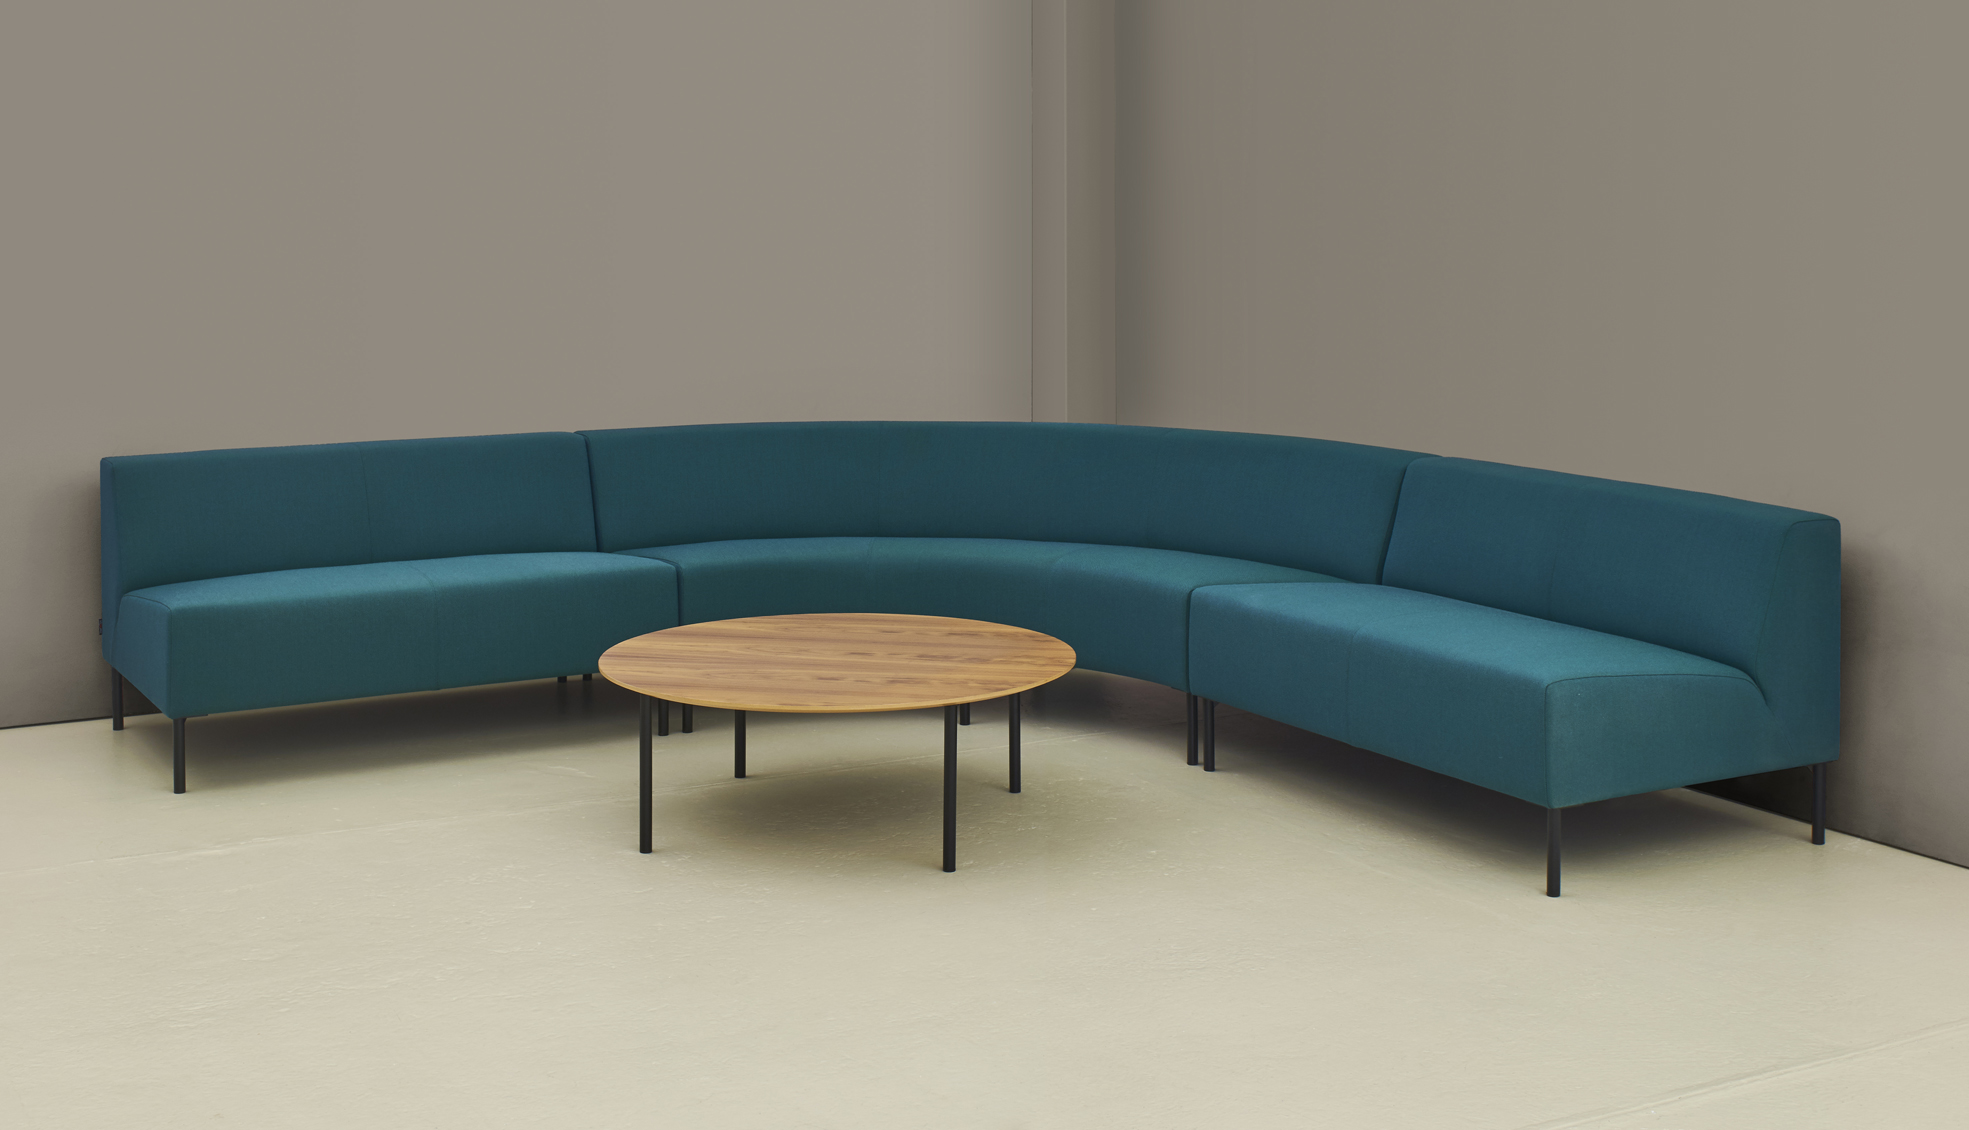 hm18y1 curved sofa, hm18f and hm18z table (1) (low res).jpg